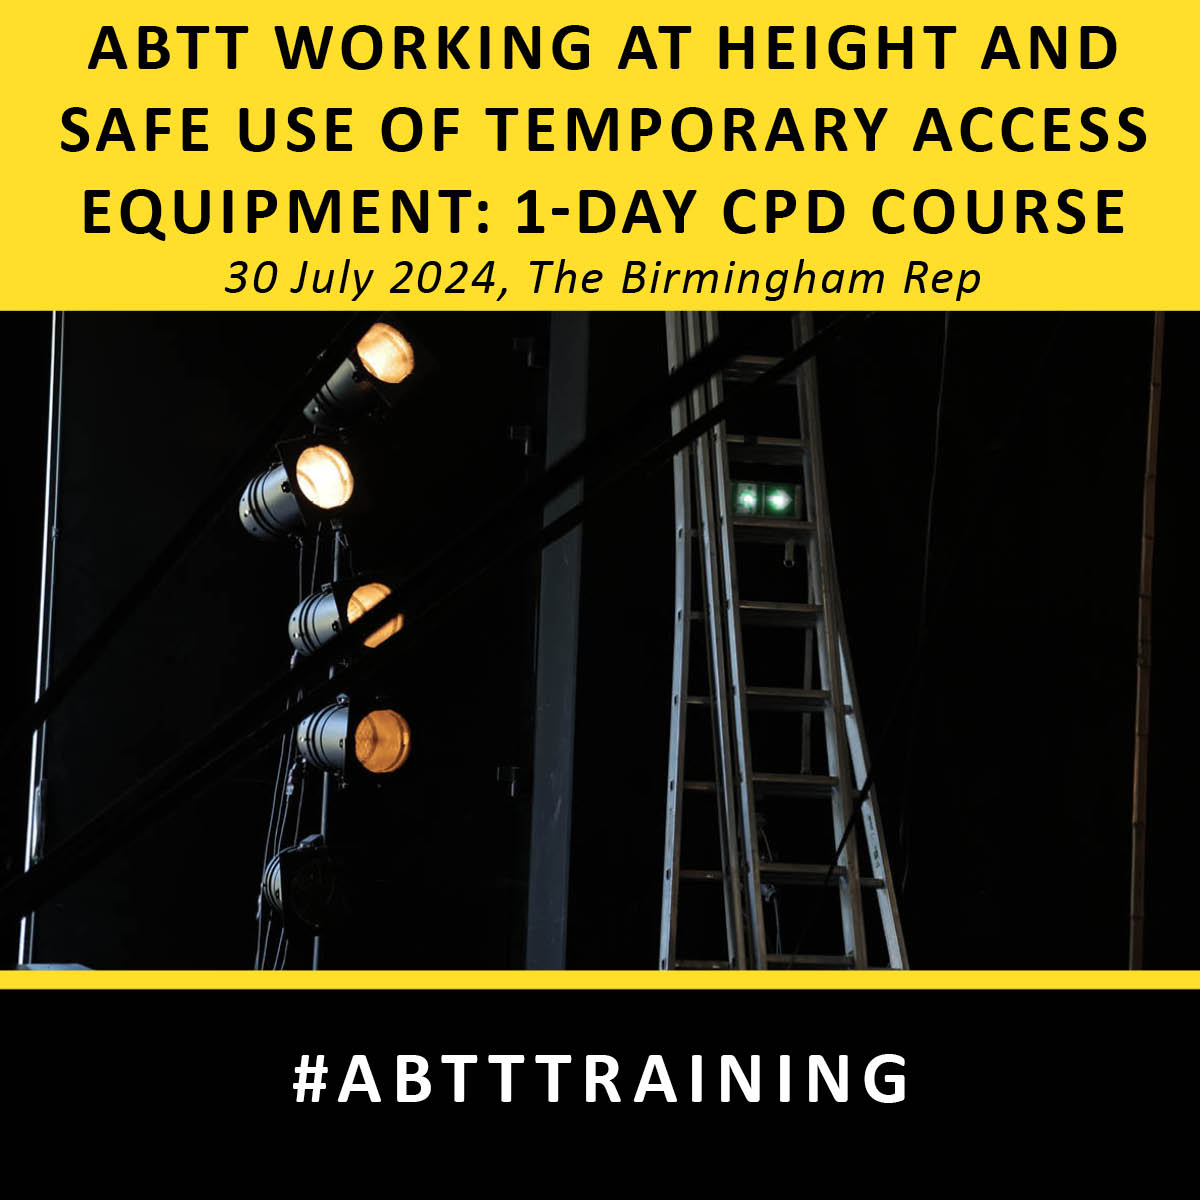 ONE-DAY CPD COURSE NOW BOOKING: ABTT Working at Height and Safe Use of Temporary Access Equipment. Birmingham Rep, 30 July 2024. Find out more and book here: abtt.org.uk/events/one-day… #ABTTTraining #Theatre #TheatreTechnician #Backstage